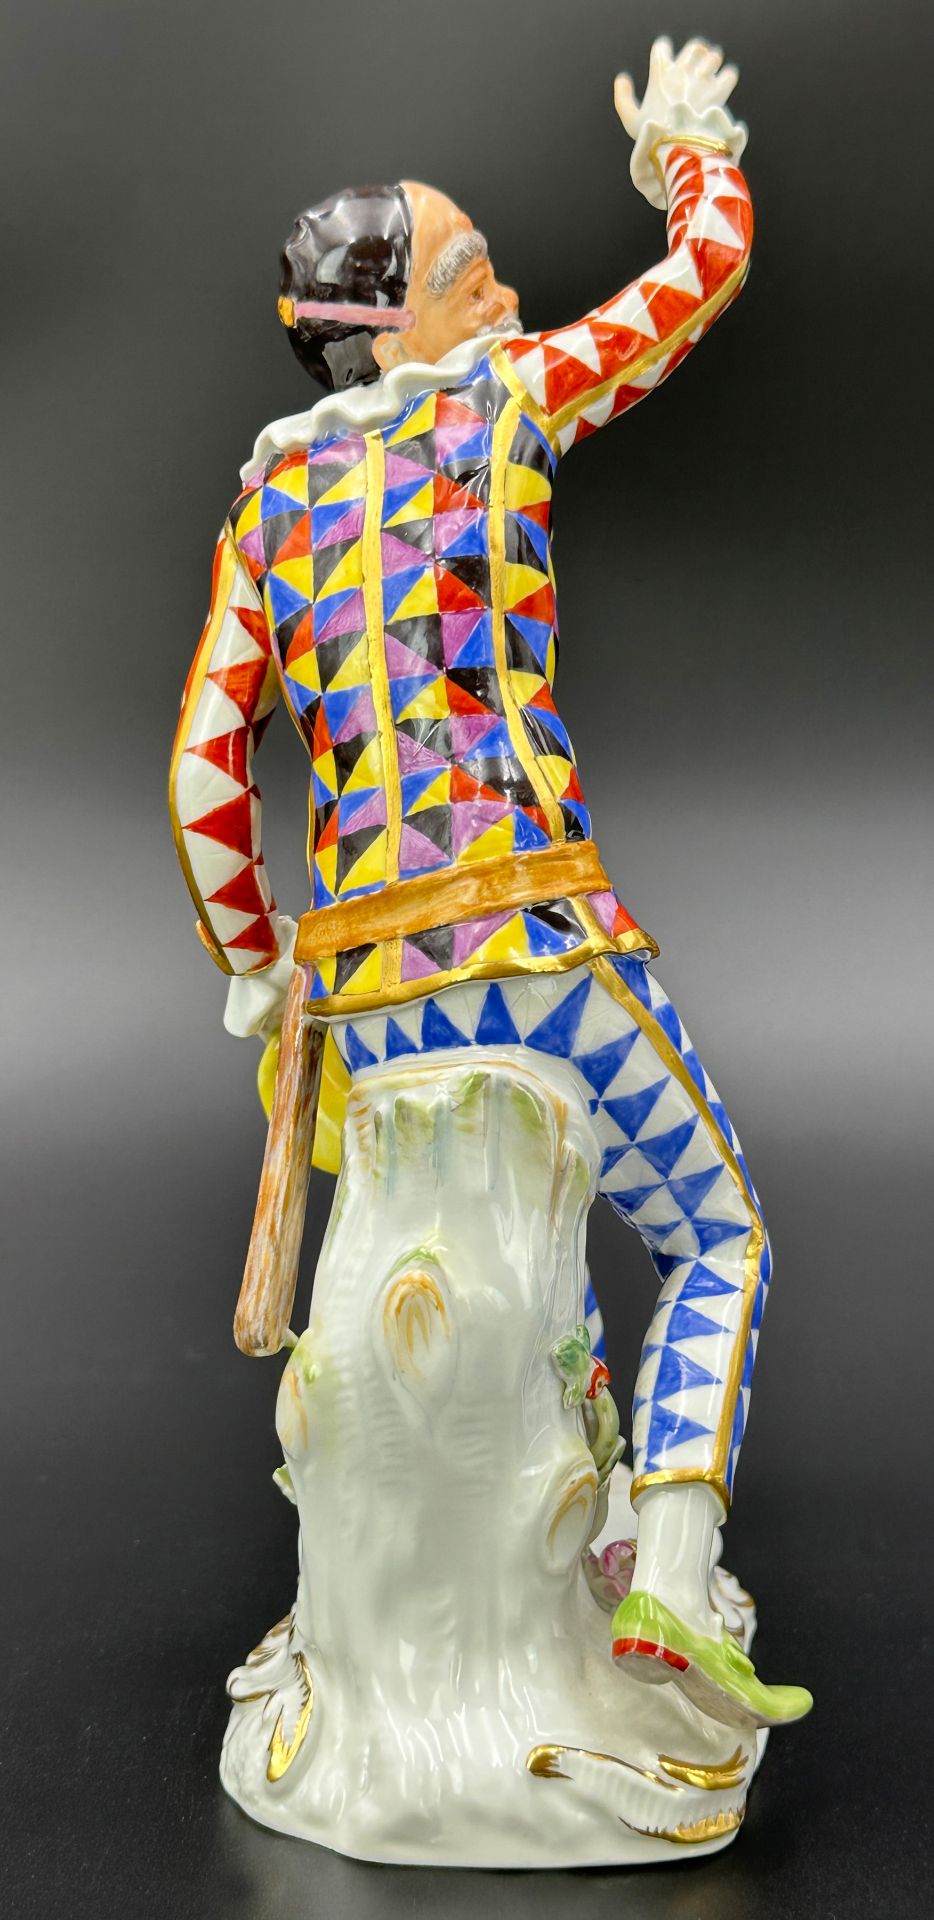 MEISSEN figure. Harlequin with hat. "Commedia dell' Arte". 1st choice. 20th century. - Image 3 of 11